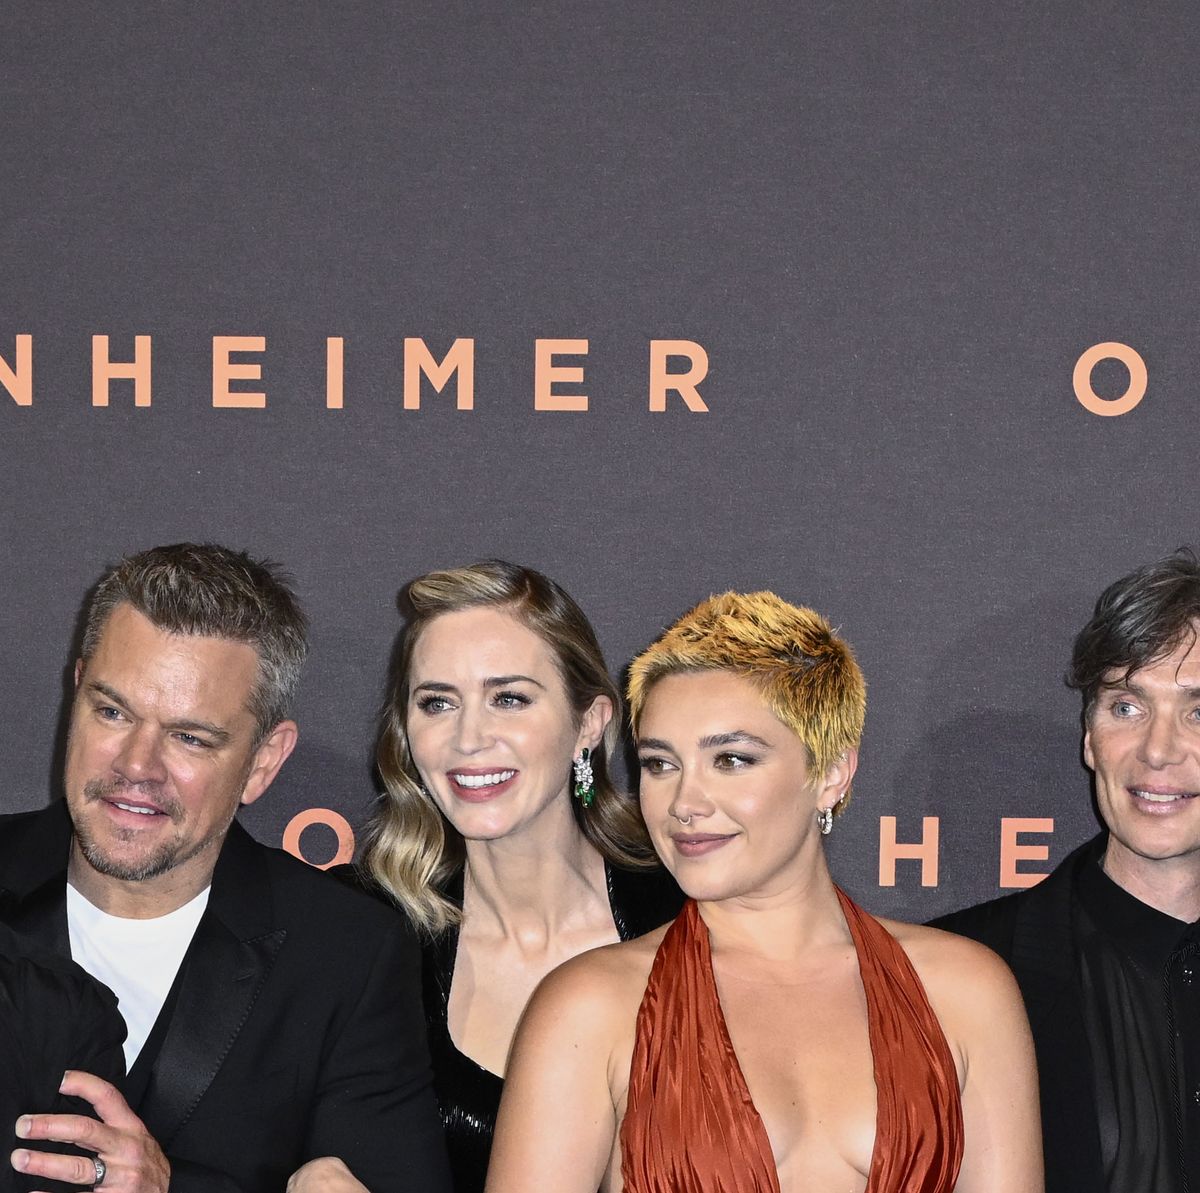 Cast of Oppenheimer walk out of UK premiere ahead of actors' strike  announcement